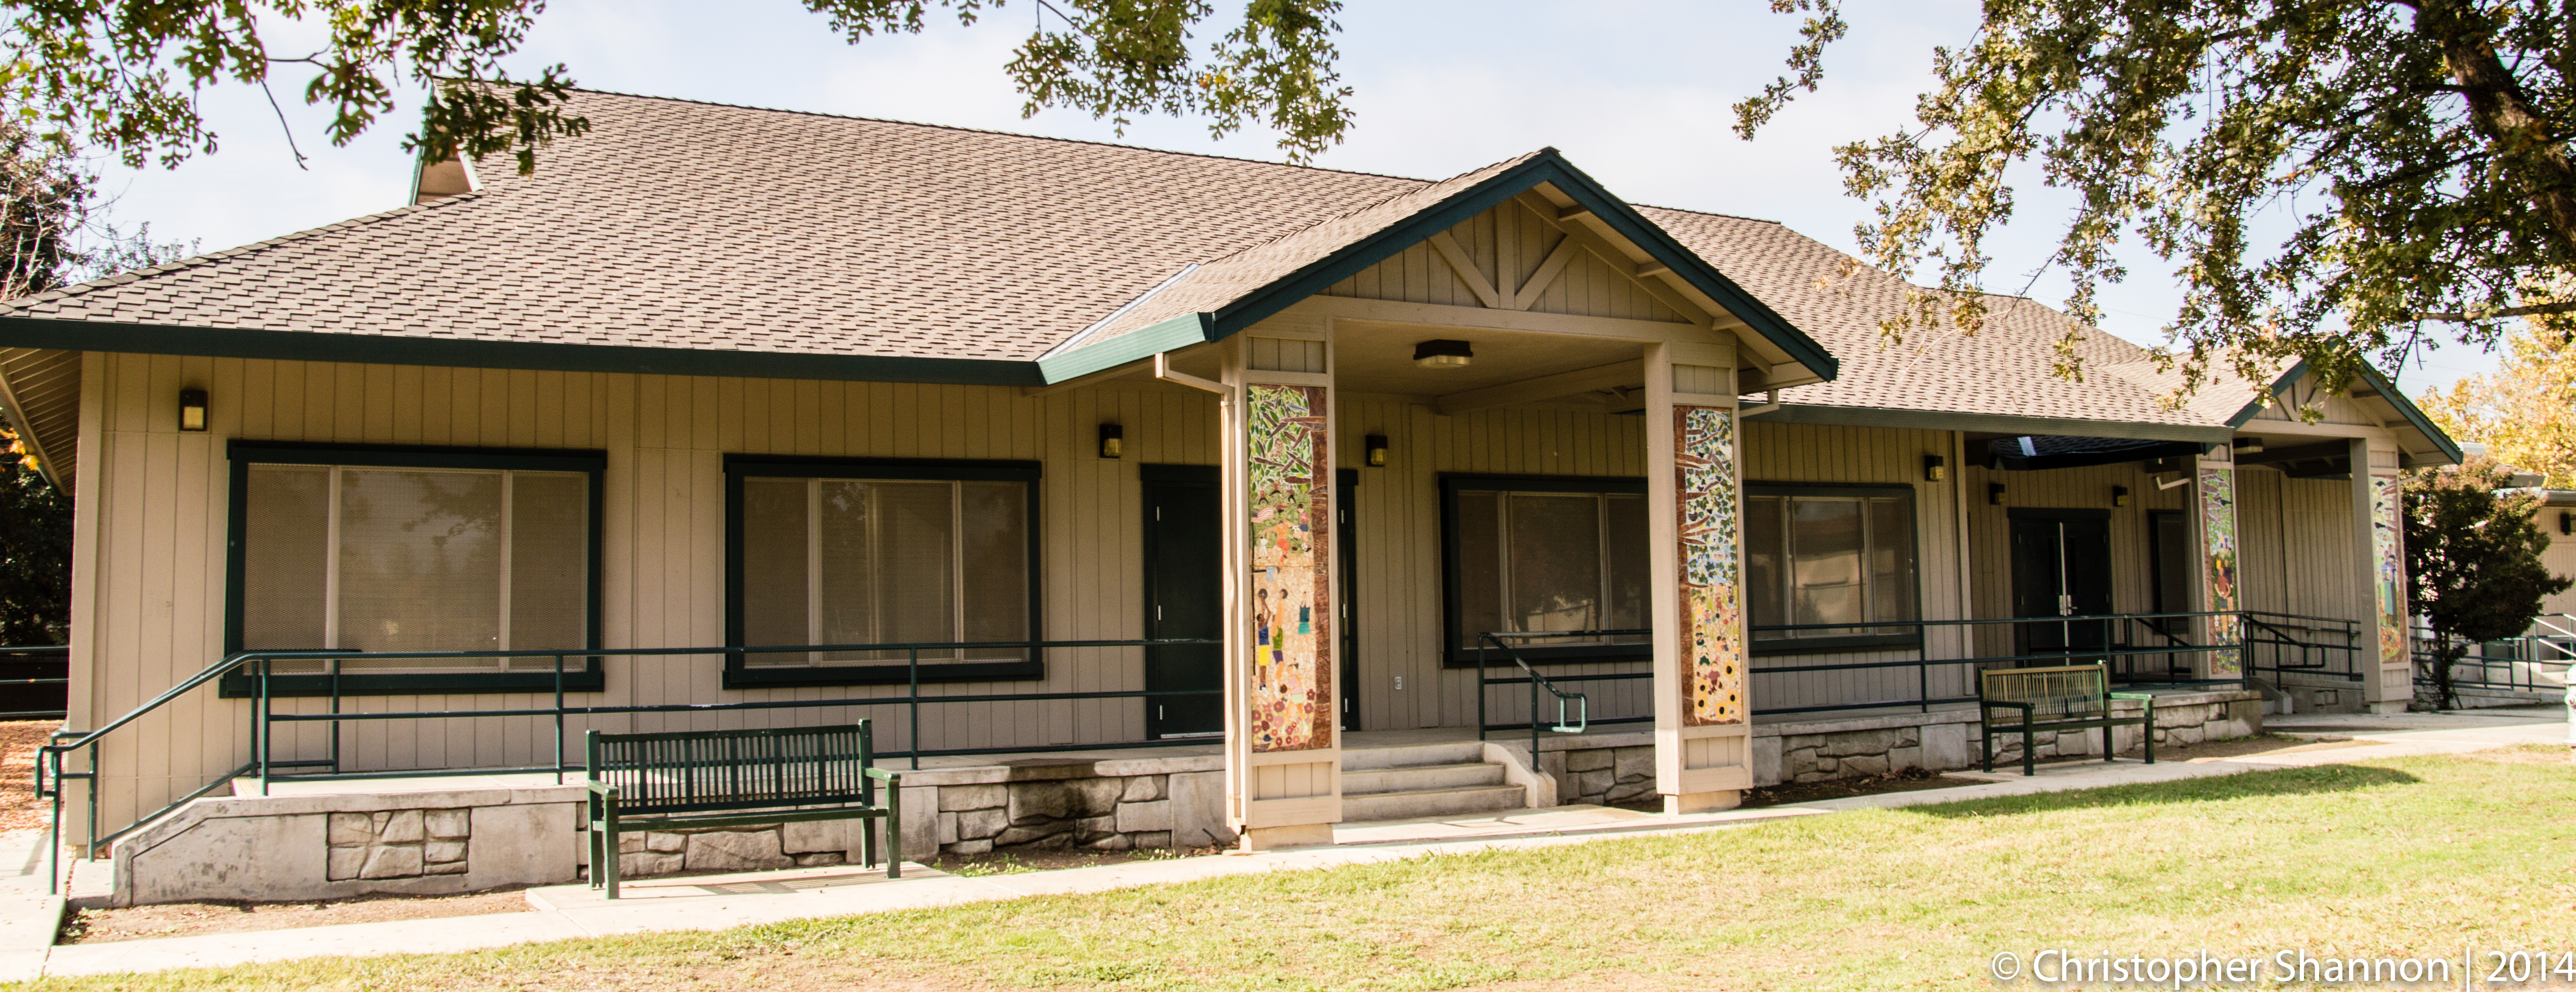 Image of Evelyn Moore Community Center building